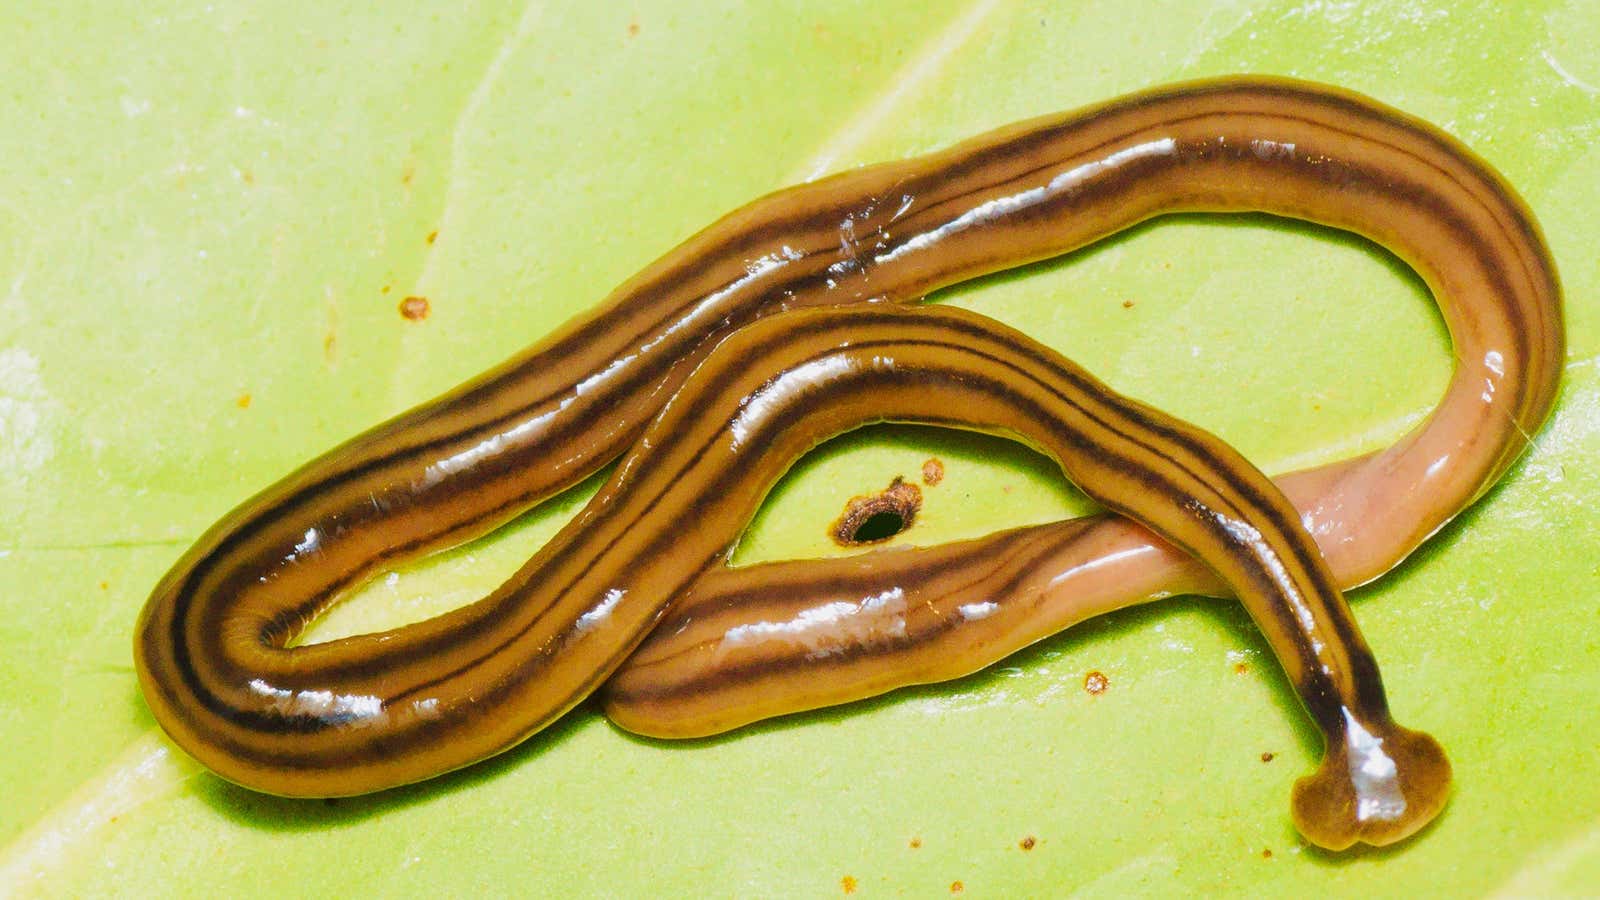 Entomologists missed this giant worm invading France for 20 years.